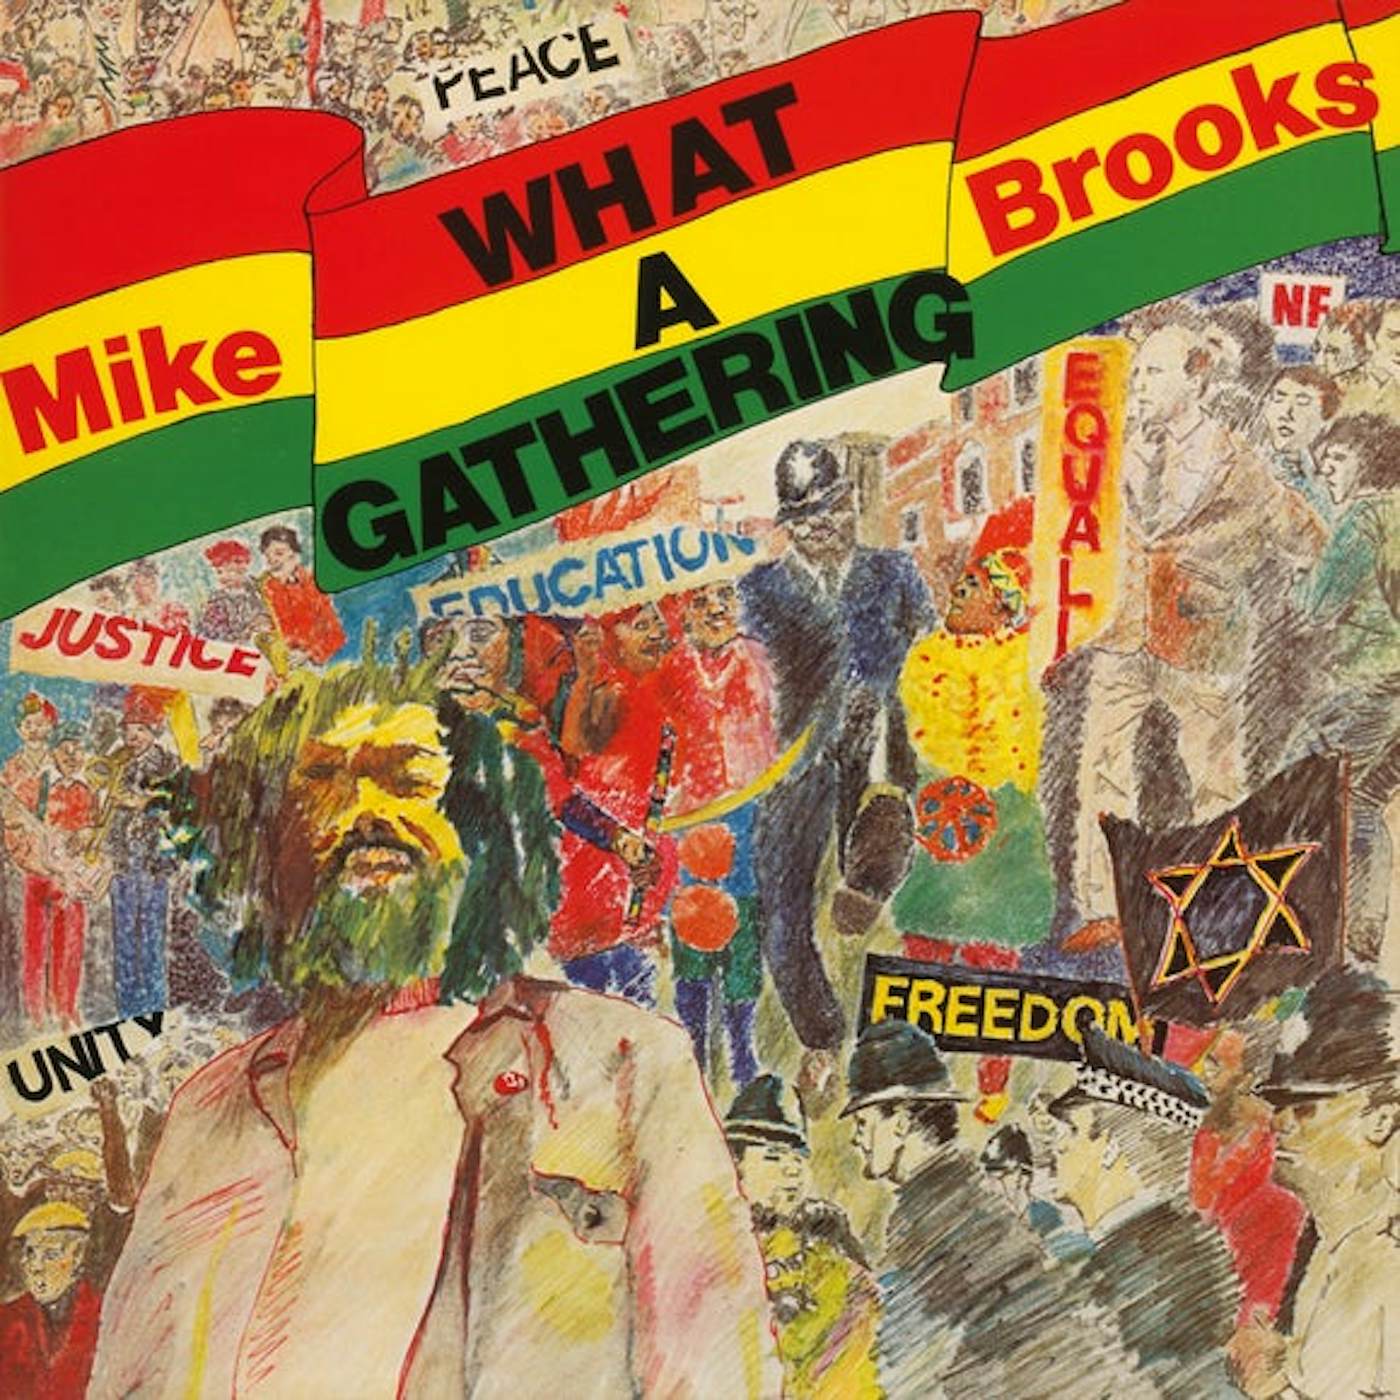 Mike Brooks WHAT A GATHERING Vinyl Record